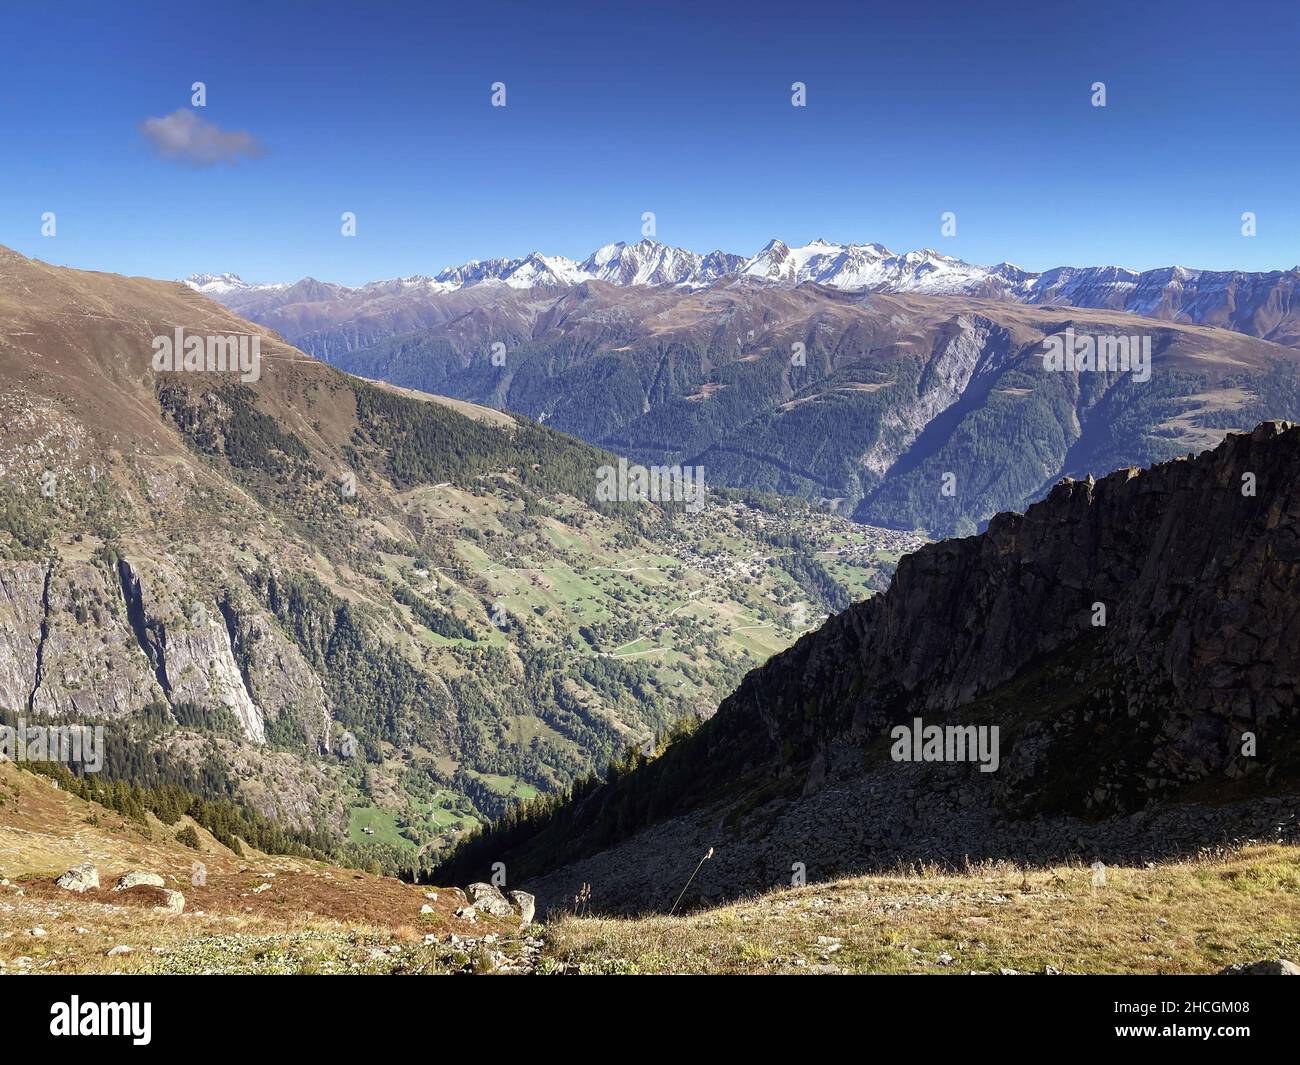 Mountain Landscape in the Swiss Alps Stock Photo